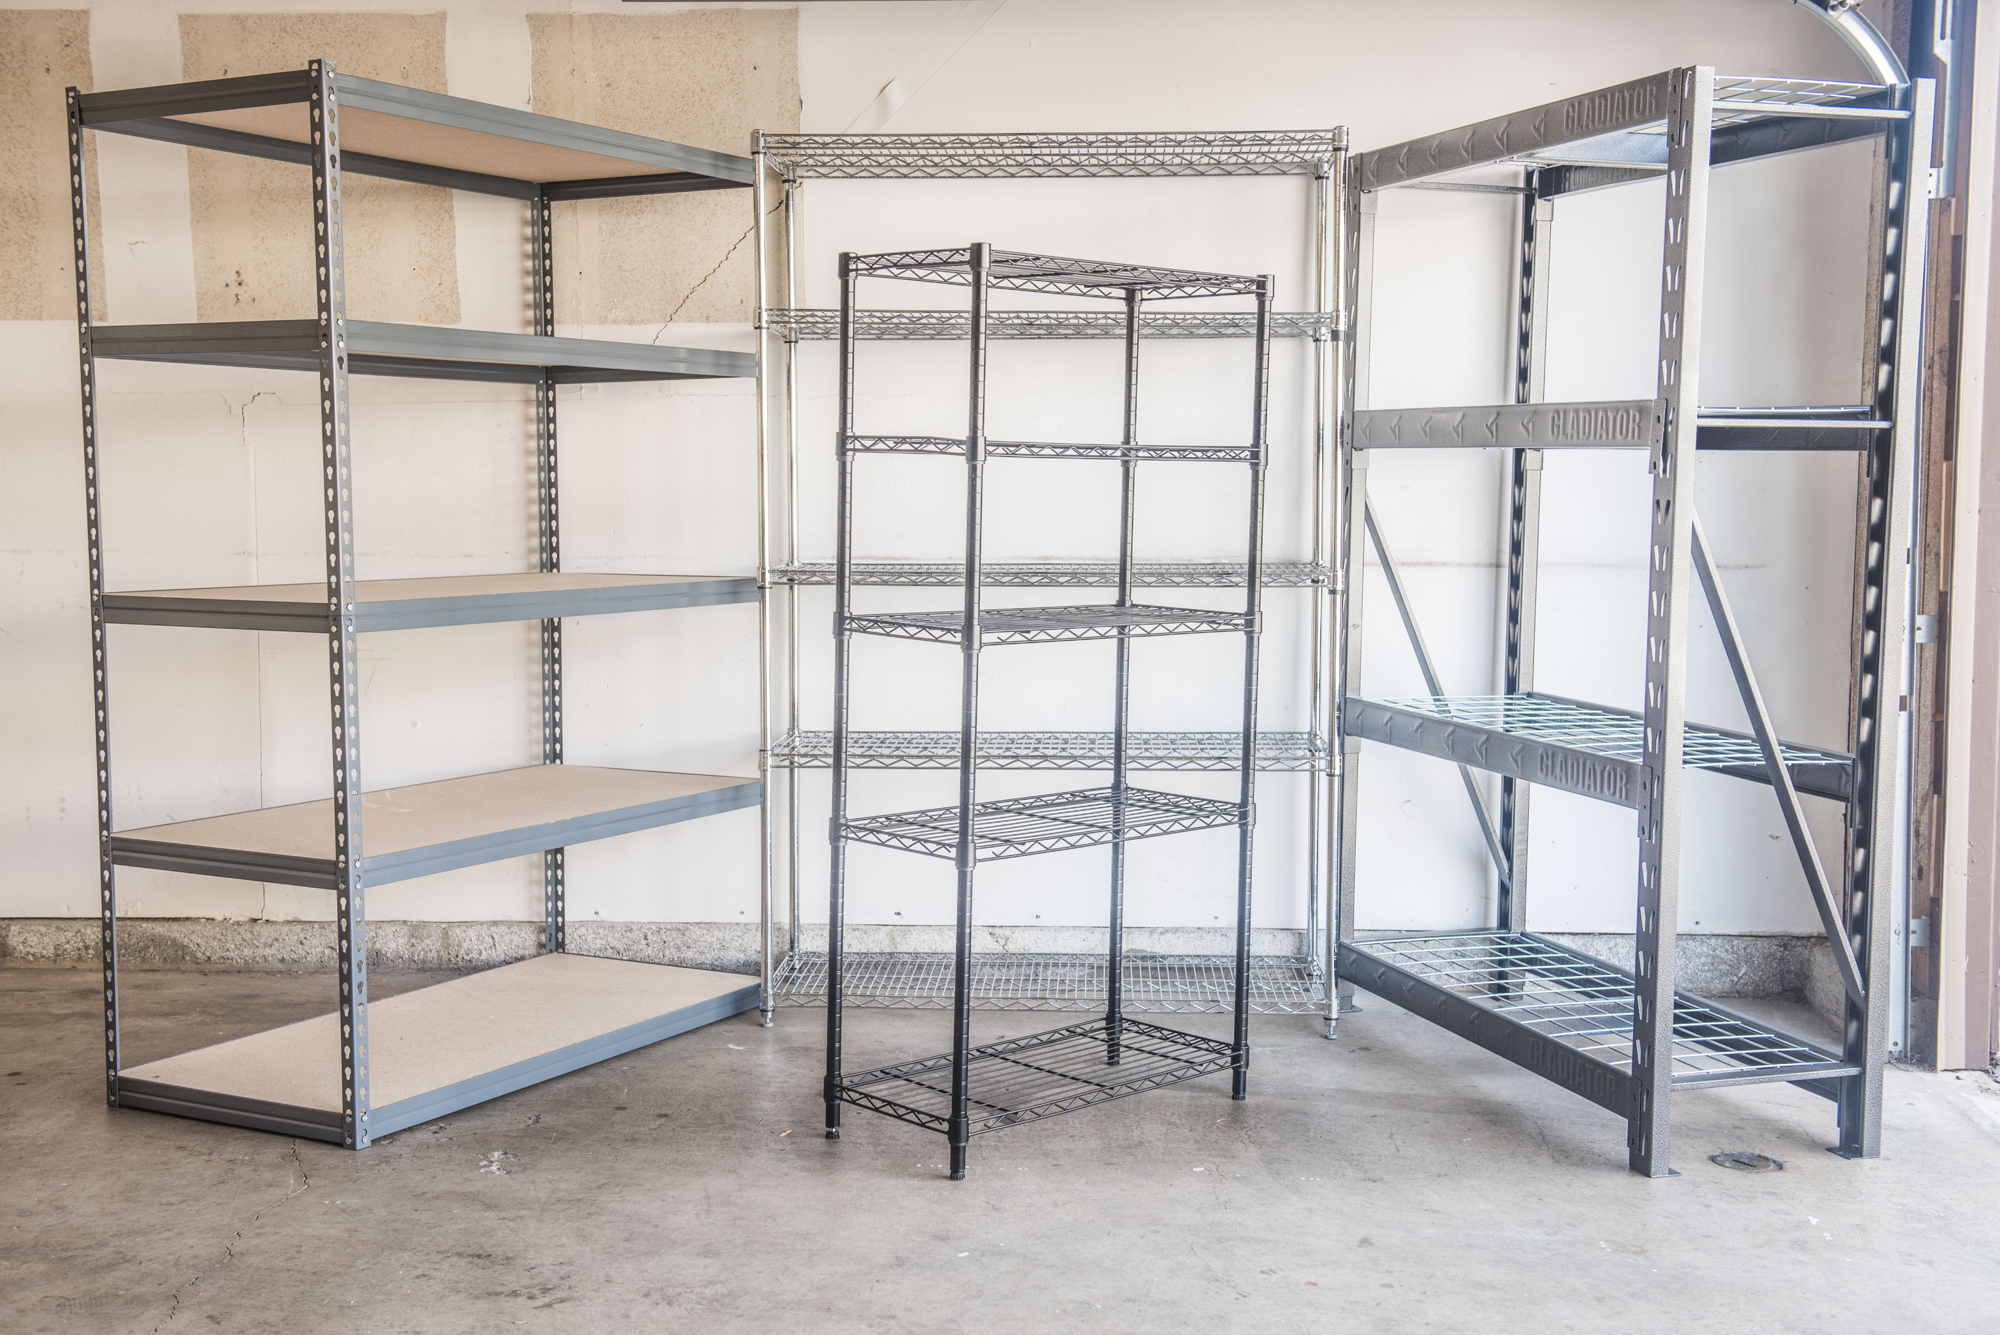 The Best Garage Shelving Of 2021, Steel Shelving With Wheels